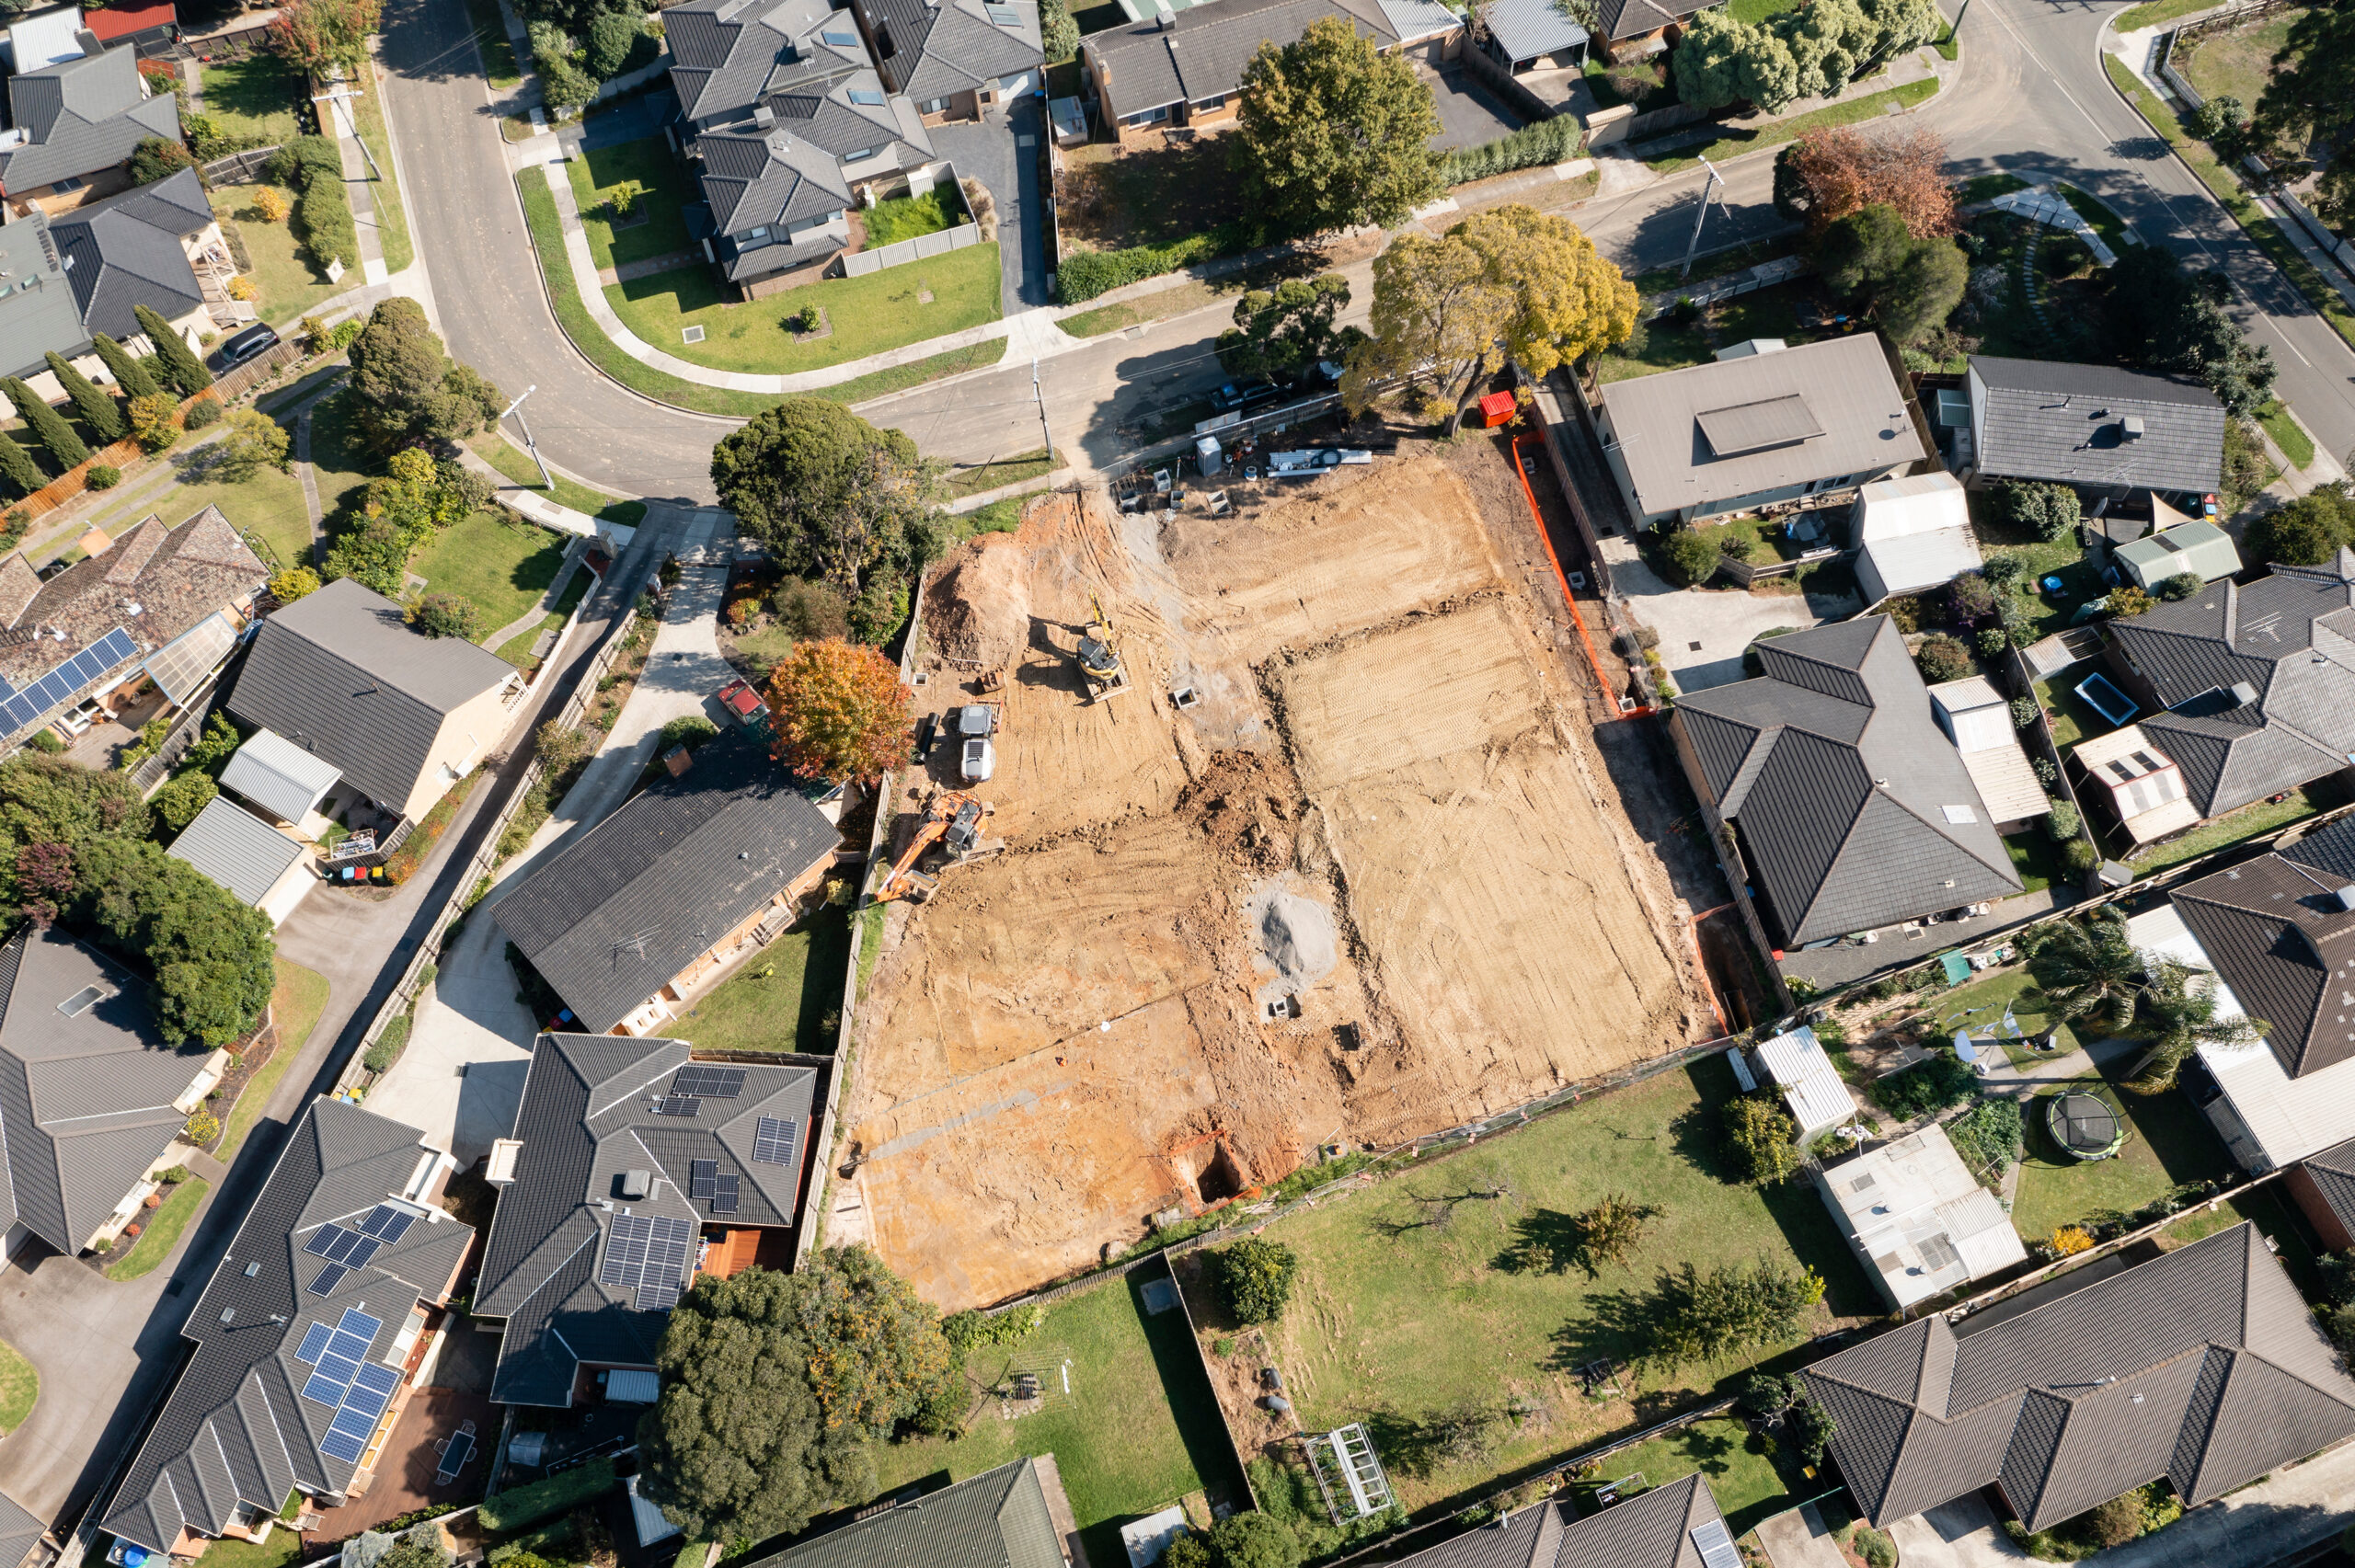 Aerial view of land under development in a neighborhood